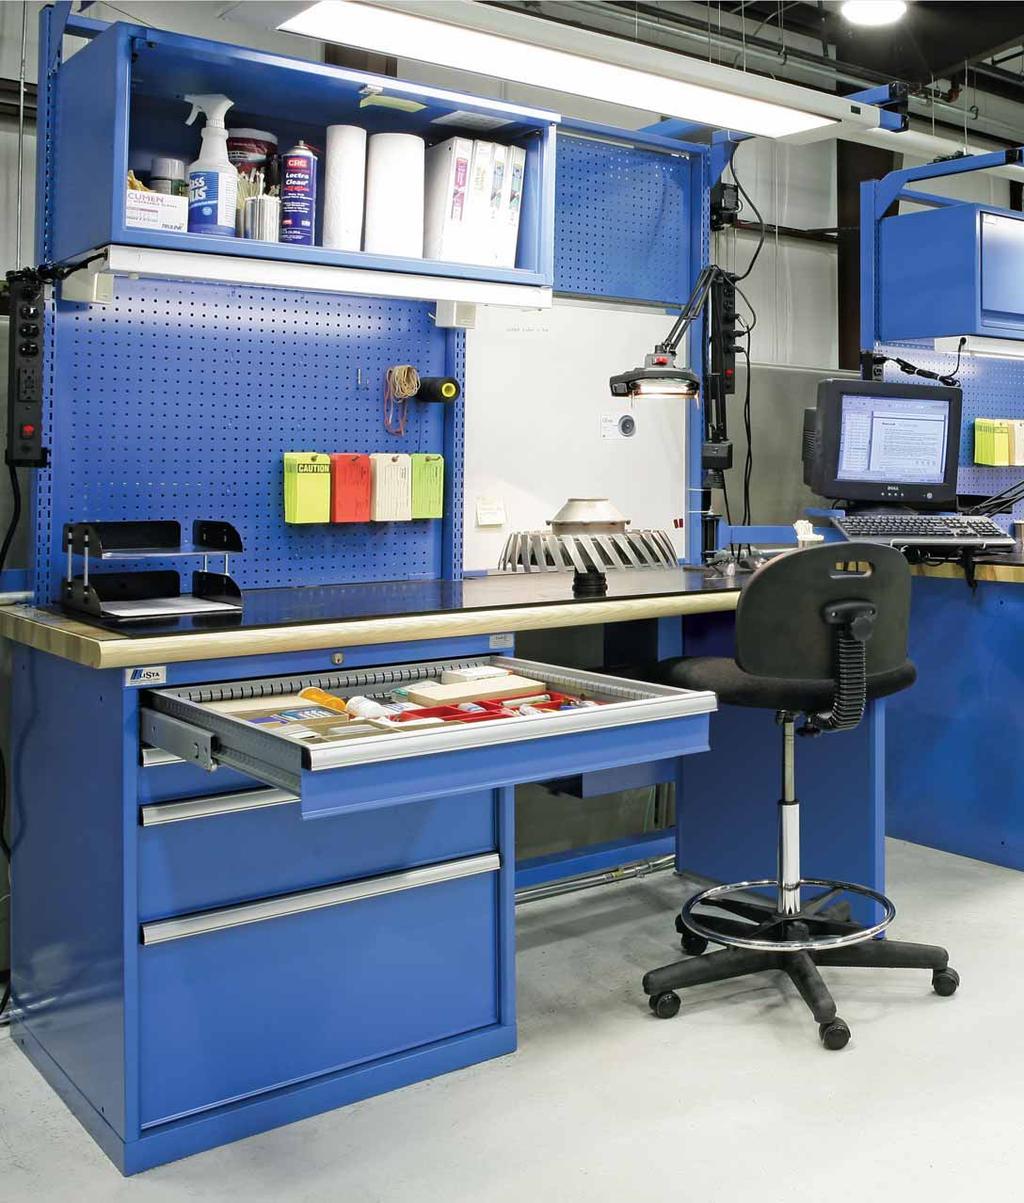 Lista Nexus System By equipping its workbenches with the Nexus Accessory System, Landmark Aviation took its productivity to stratospheric levels.